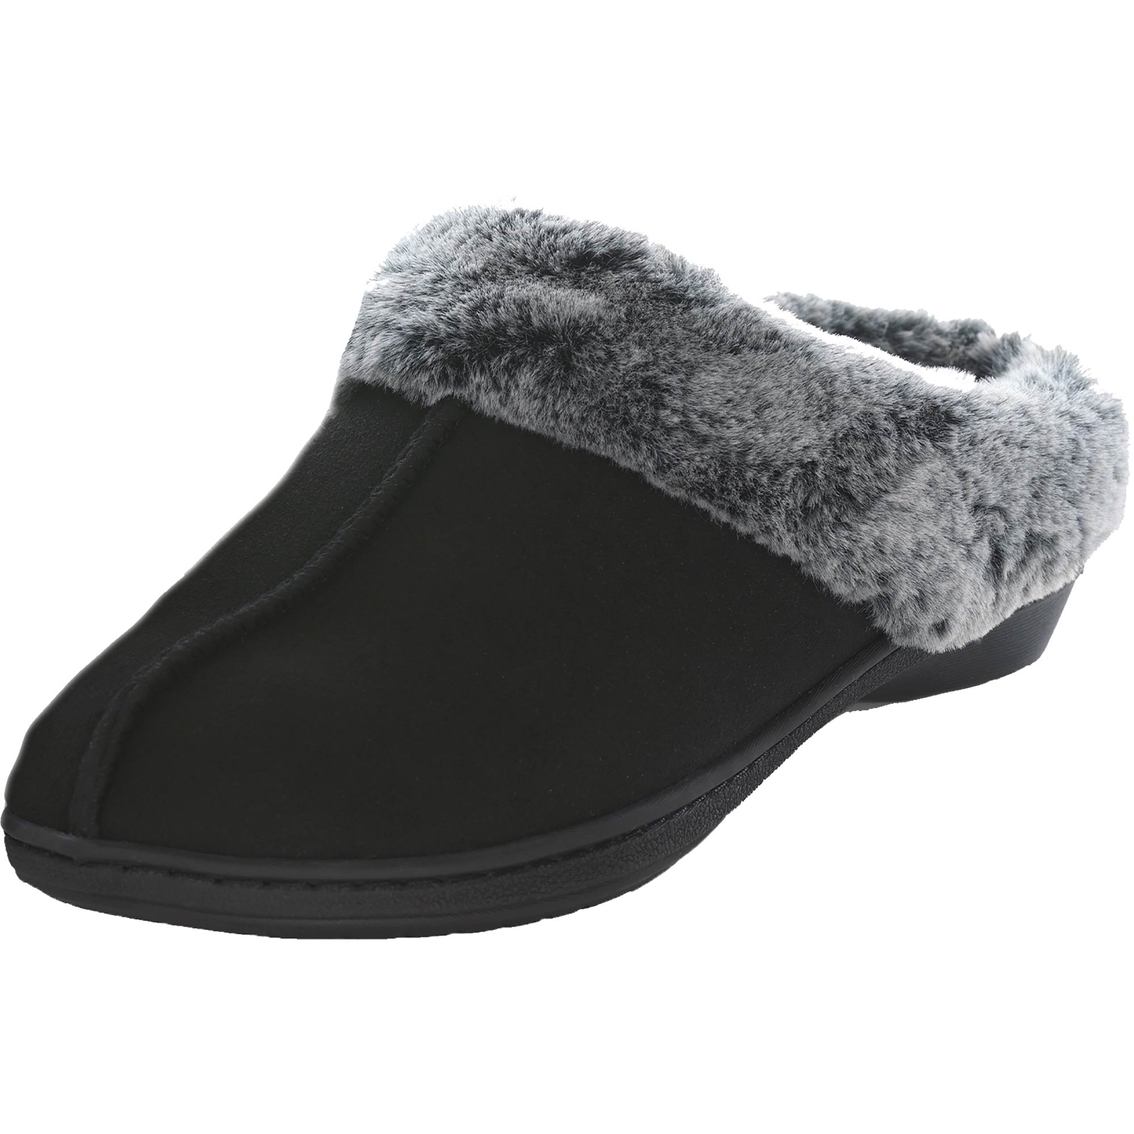 Powerstep Women's Clog Slippers | Slippers | Shoes | Shop The Exchange